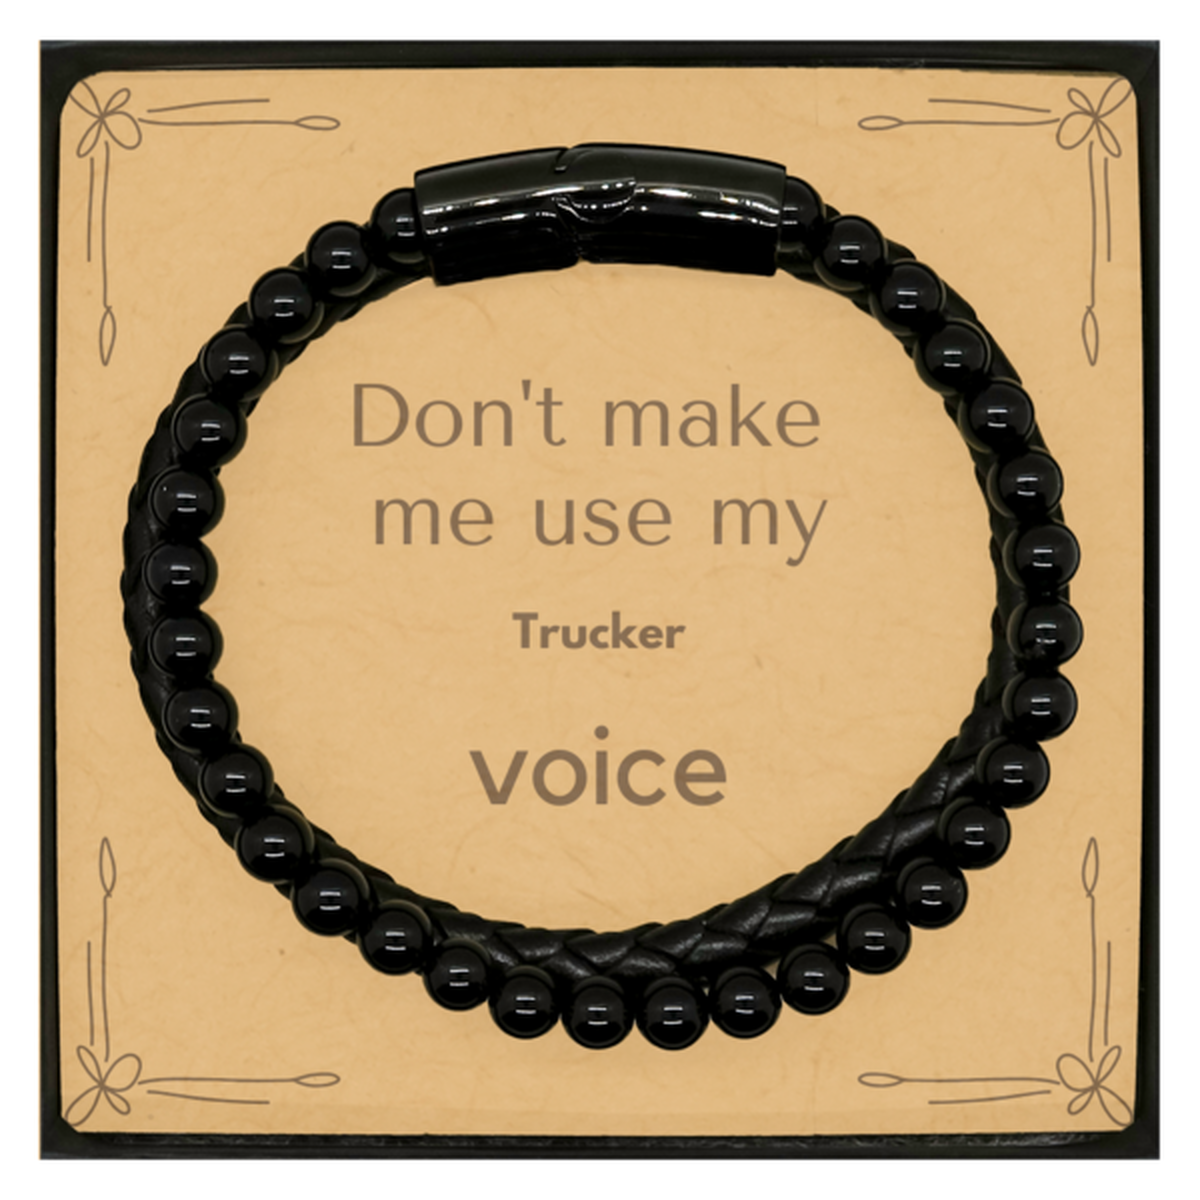 Don't make me use my Trucker voice, Sarcasm Trucker Card Gifts, Christmas Trucker Stone Leather Bracelets Birthday Unique Gifts For Trucker Coworkers, Men, Women, Colleague, Friends